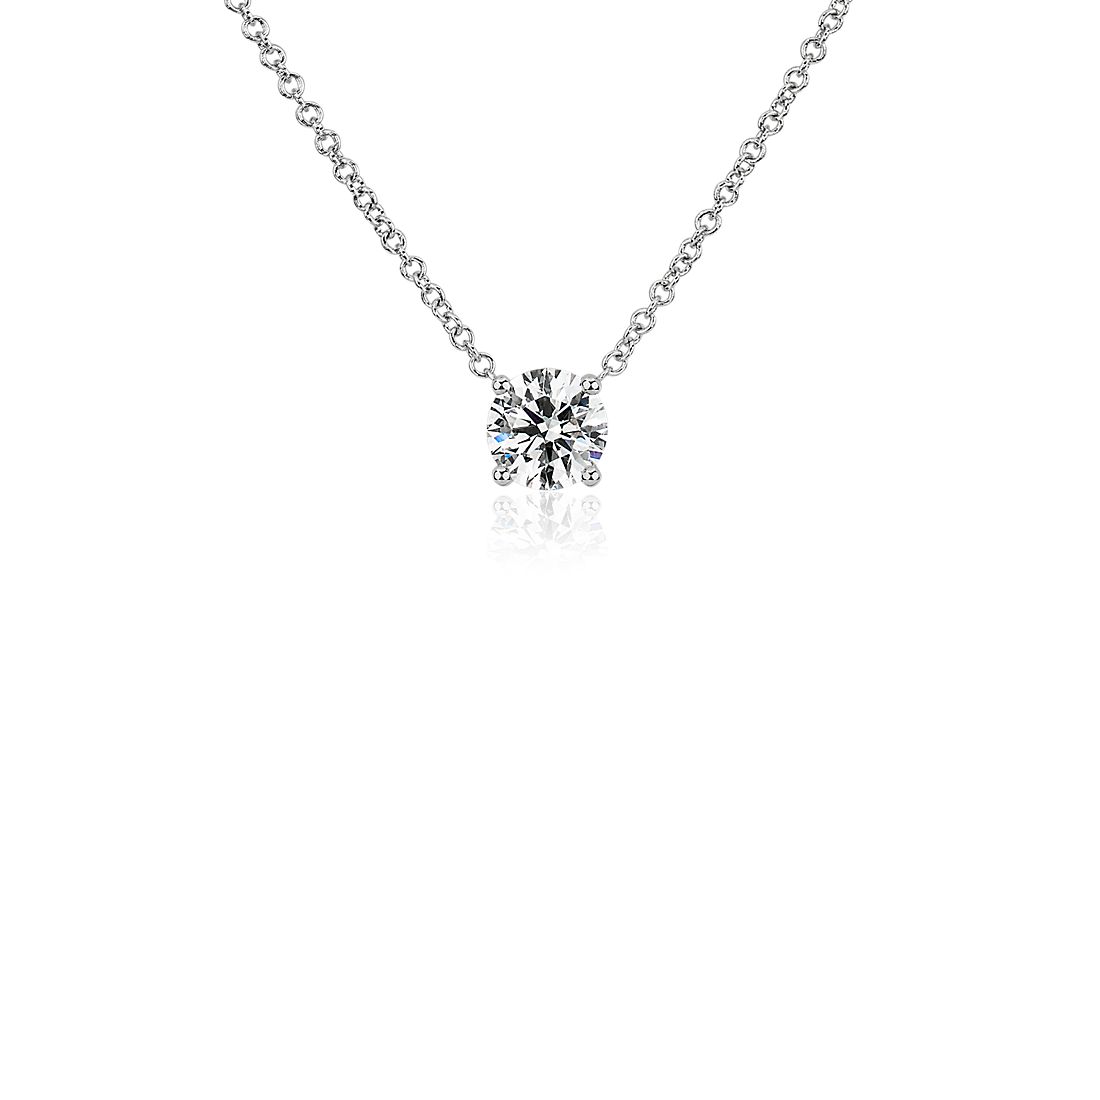 Lab Grown Diamond Floating Solitaire Pendant in 14k White Gold (0.75 ct. tw.)